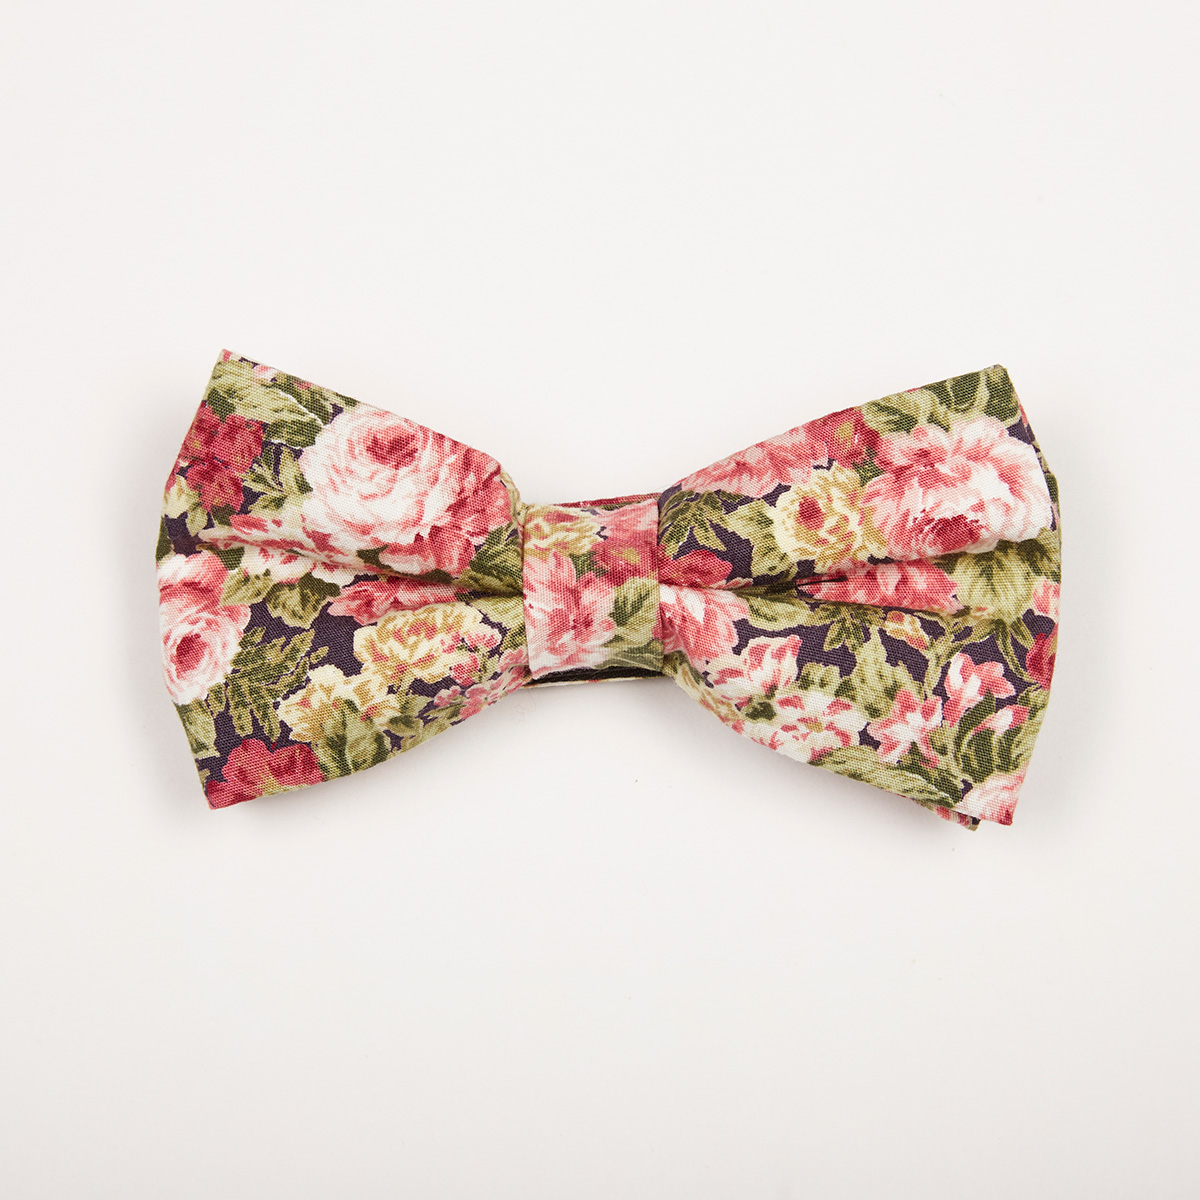 Buy Floral Mens Bow Ties Online Today | Free 1st Class UK Delivery